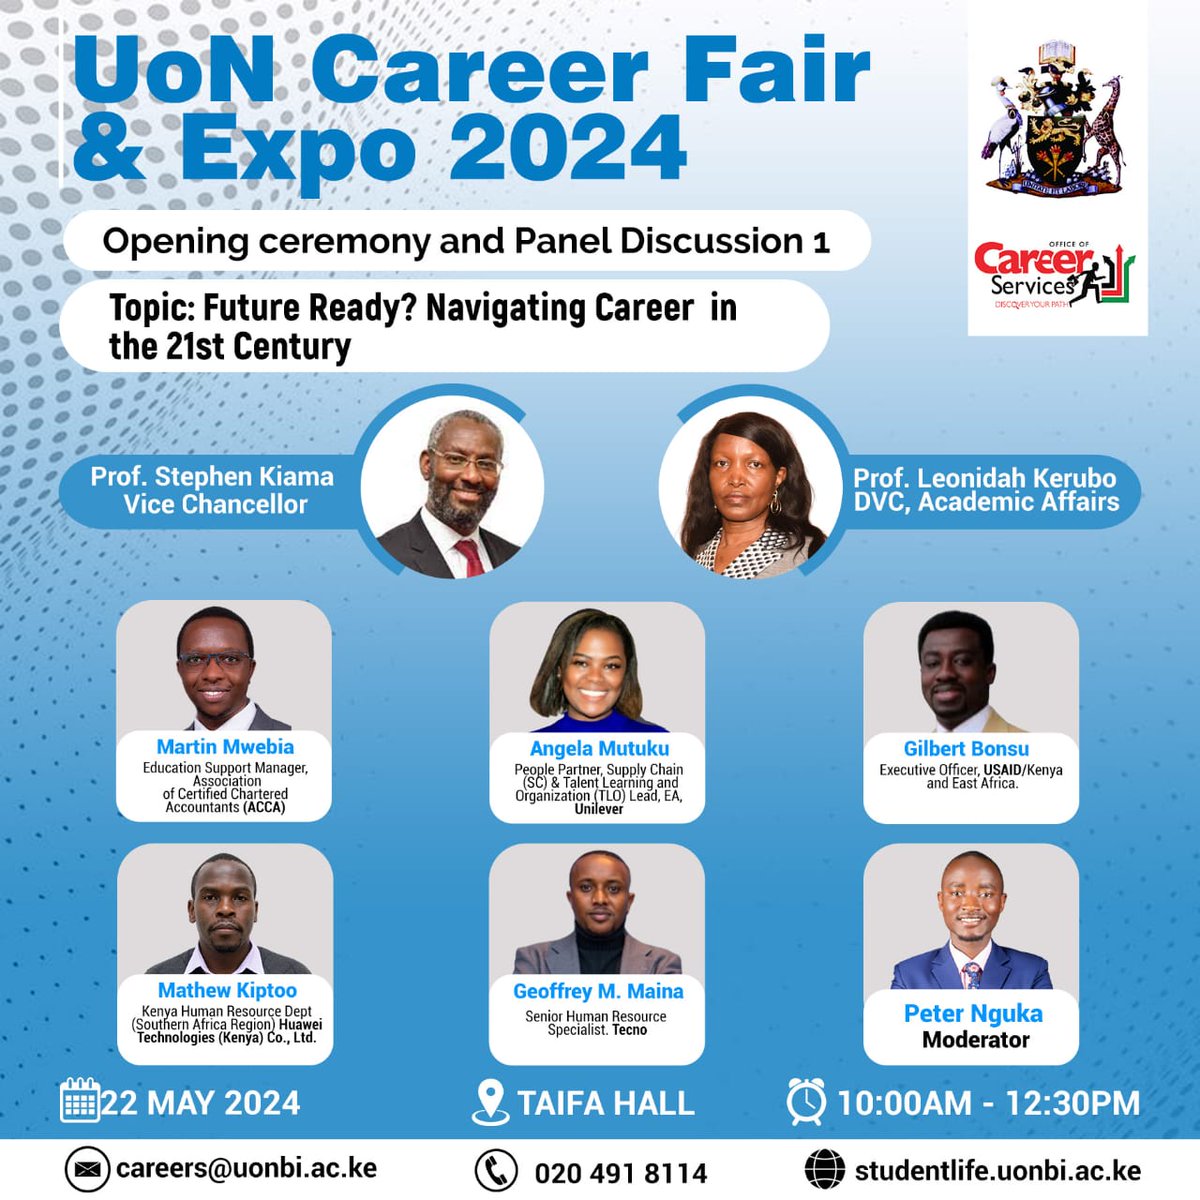 Join us as we tackle this timely discussion on the Future of Work and how to navigate the evolving Job Market' Date: May 22, 2024 Venue: Taifa Hall Time: 10.00am - 12.30pm #DevelopingMarketReadyGraduates #CareerMentorship #CareerDevelopment #WeAreUoN